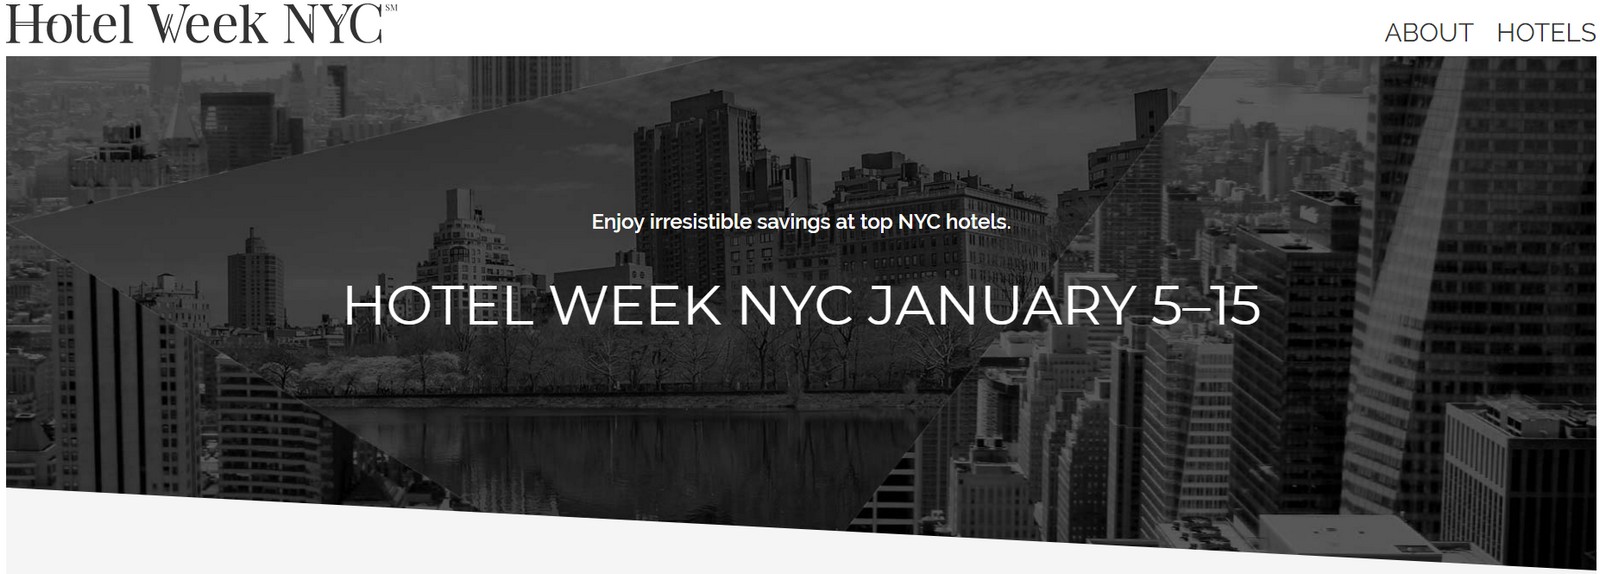 New York City Hotel Week Offers Discounted Rooms